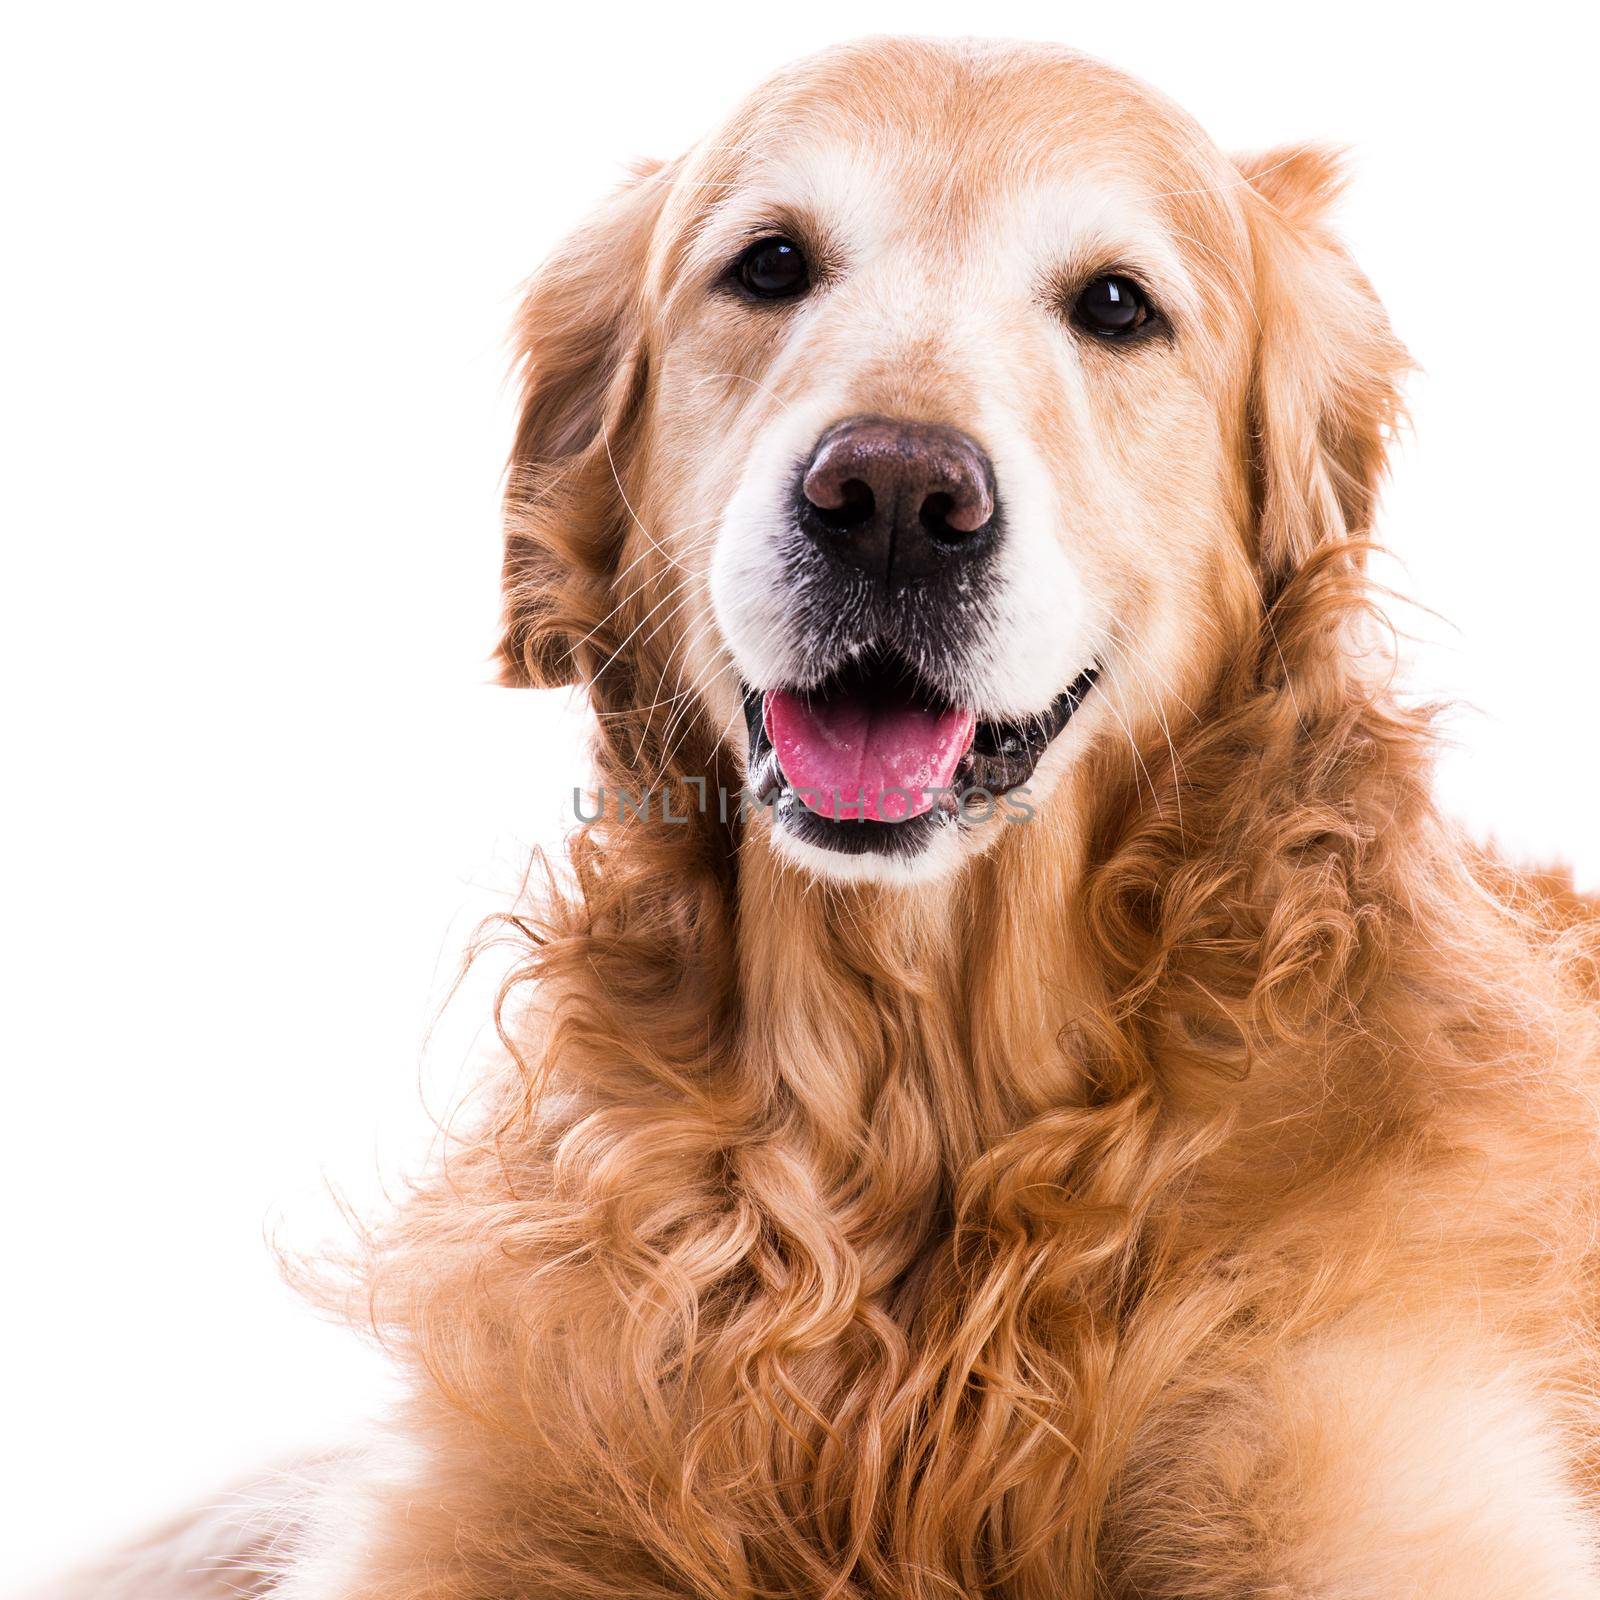 purebred golden retriever dog close-up isolated on white